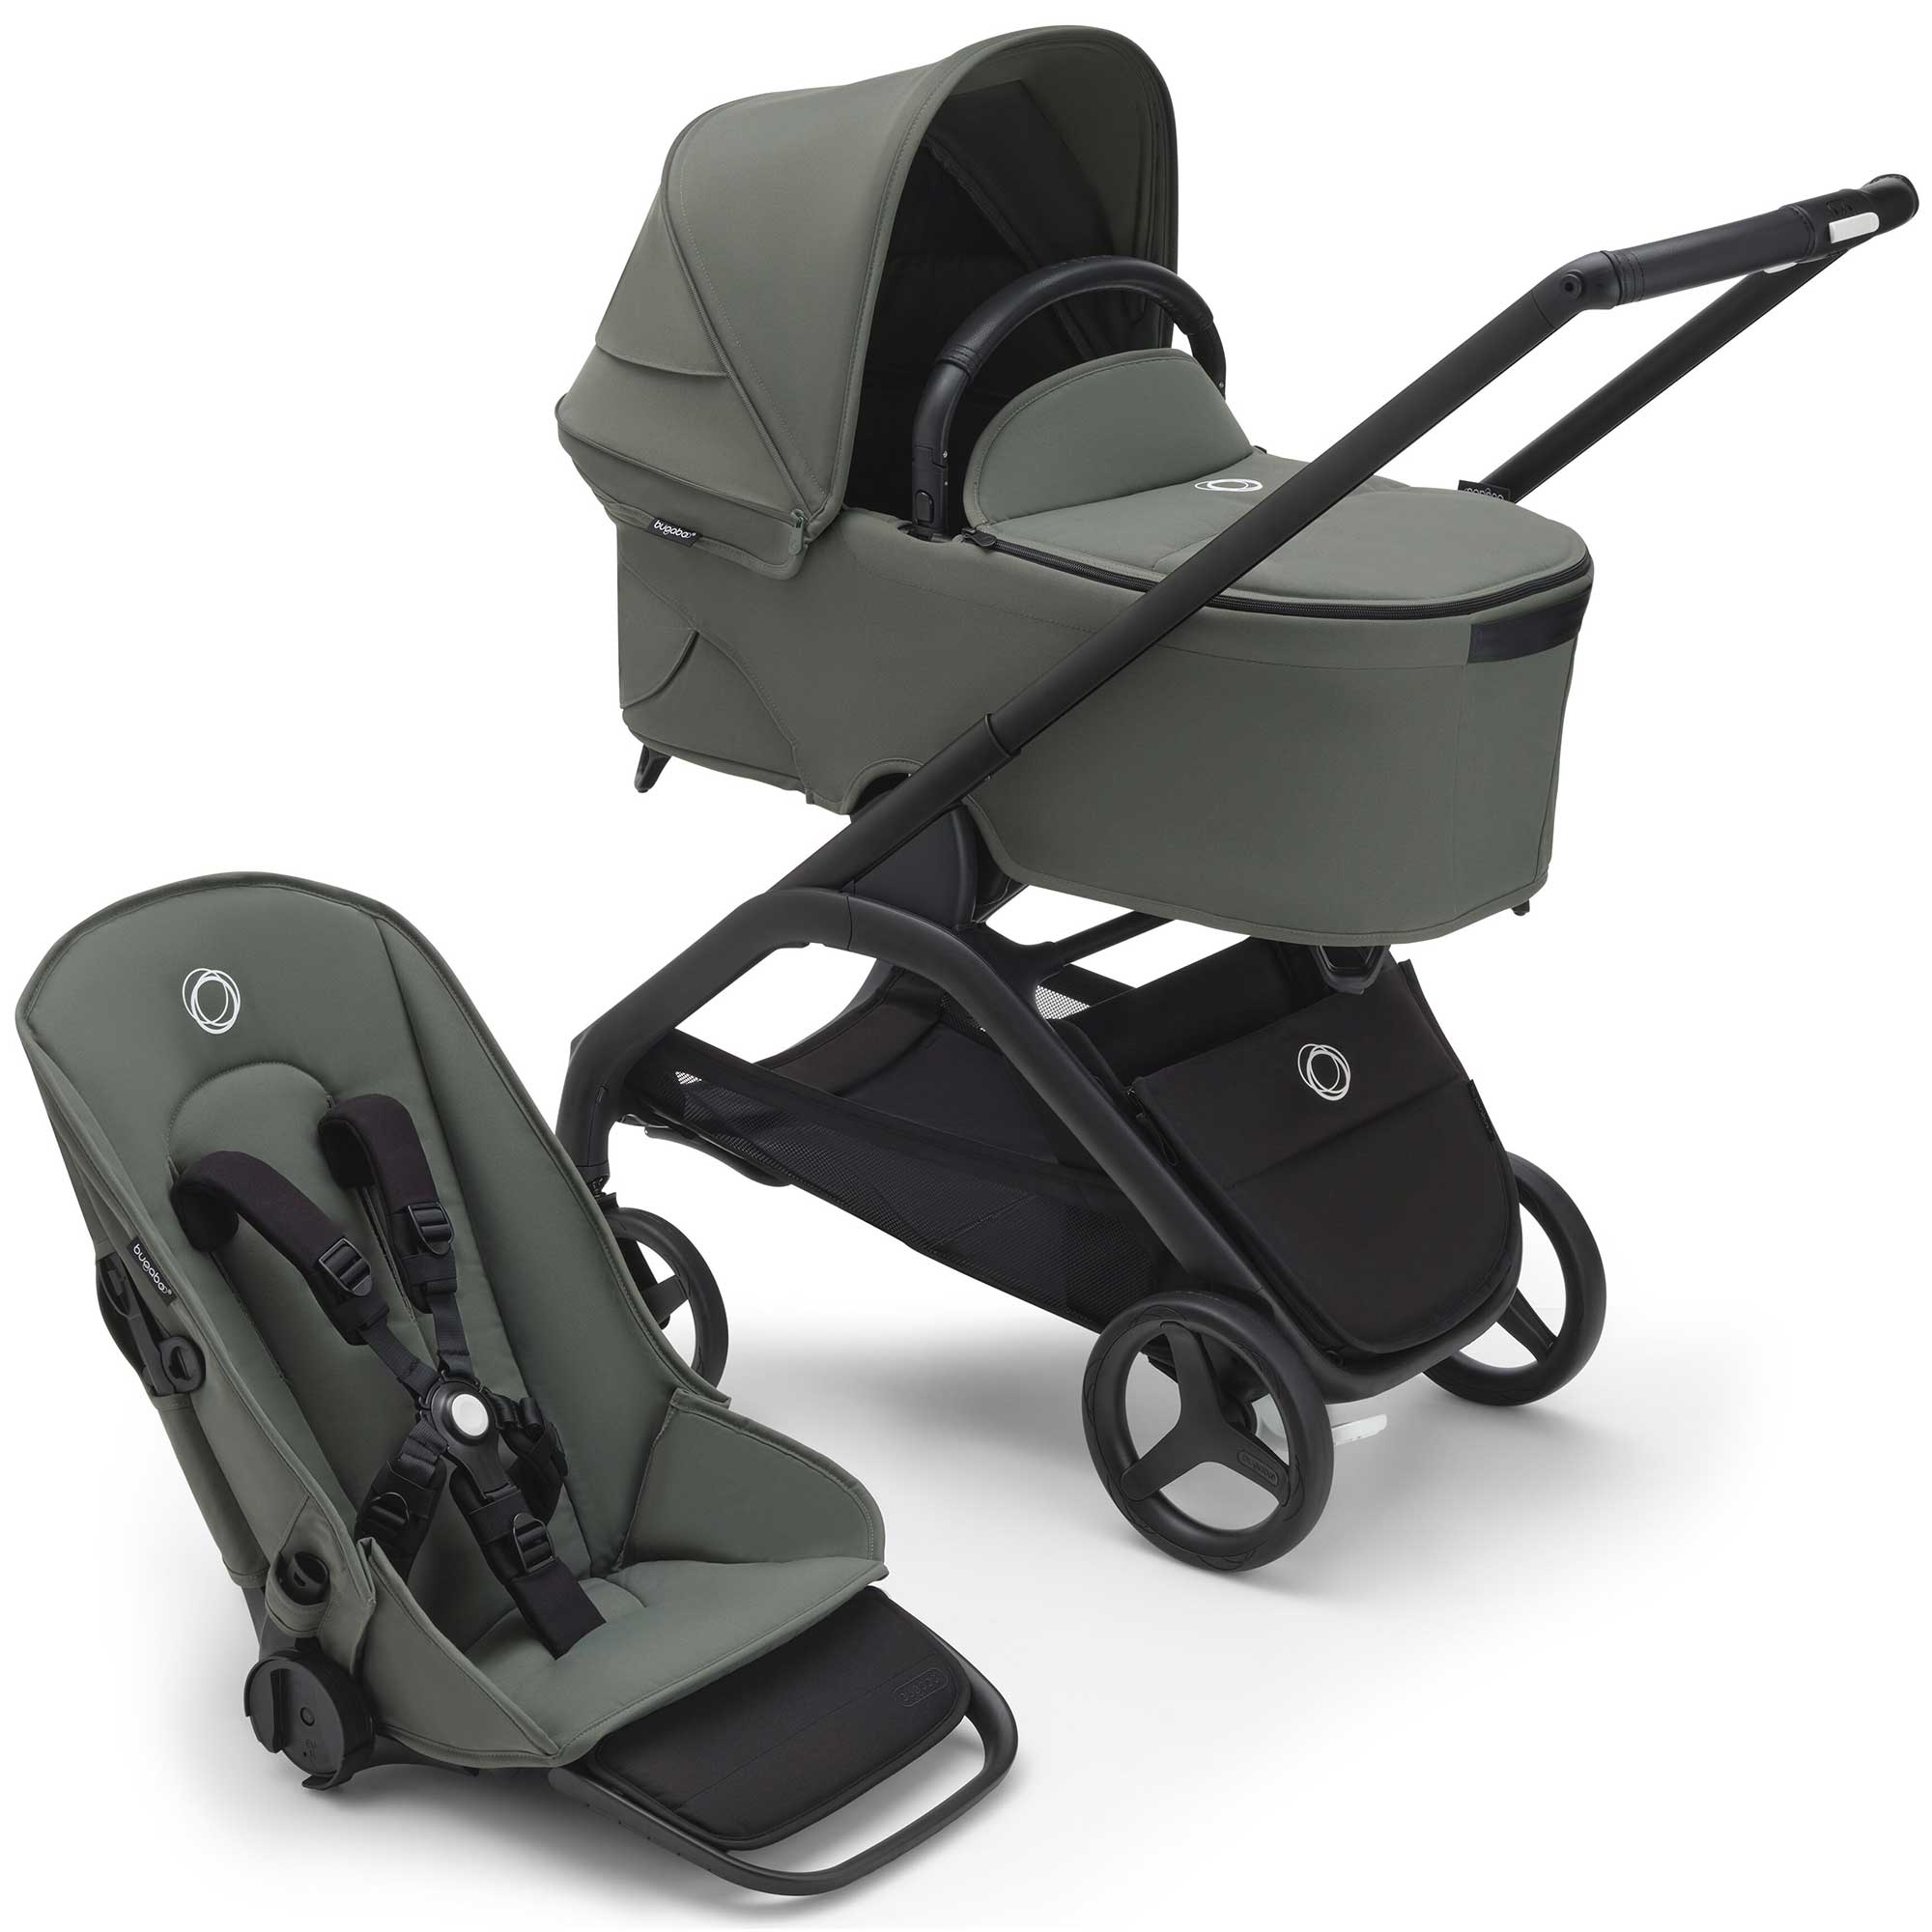 Bugaboo Baby Prams Bugaboo Dragonfly Complete Bundle - Black/Forest Green 13814-BLK-FOR-GRN